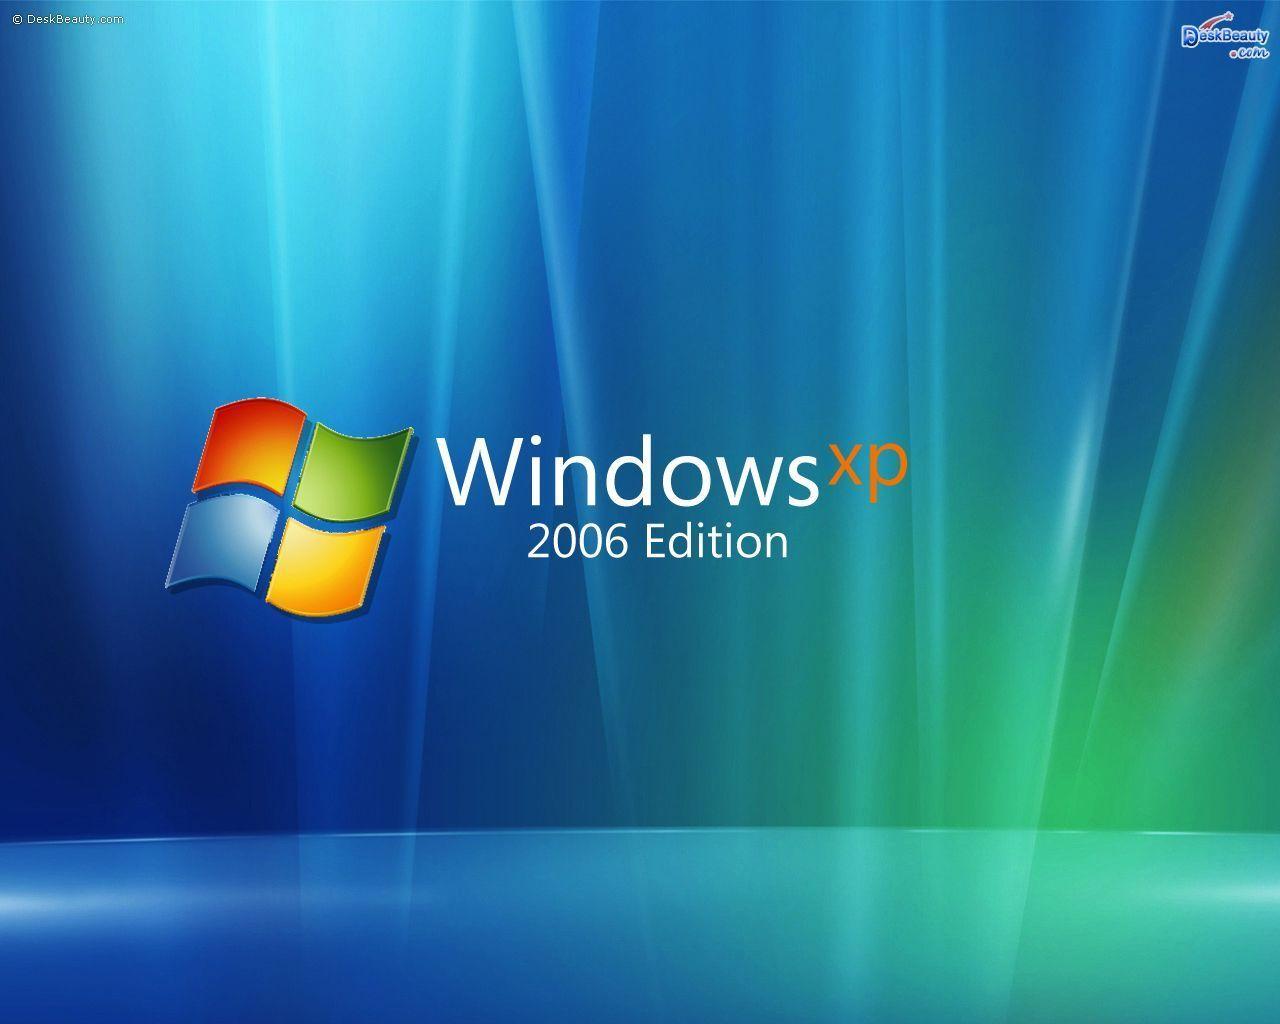 Wallpaper For > Windows Xp Professional Background